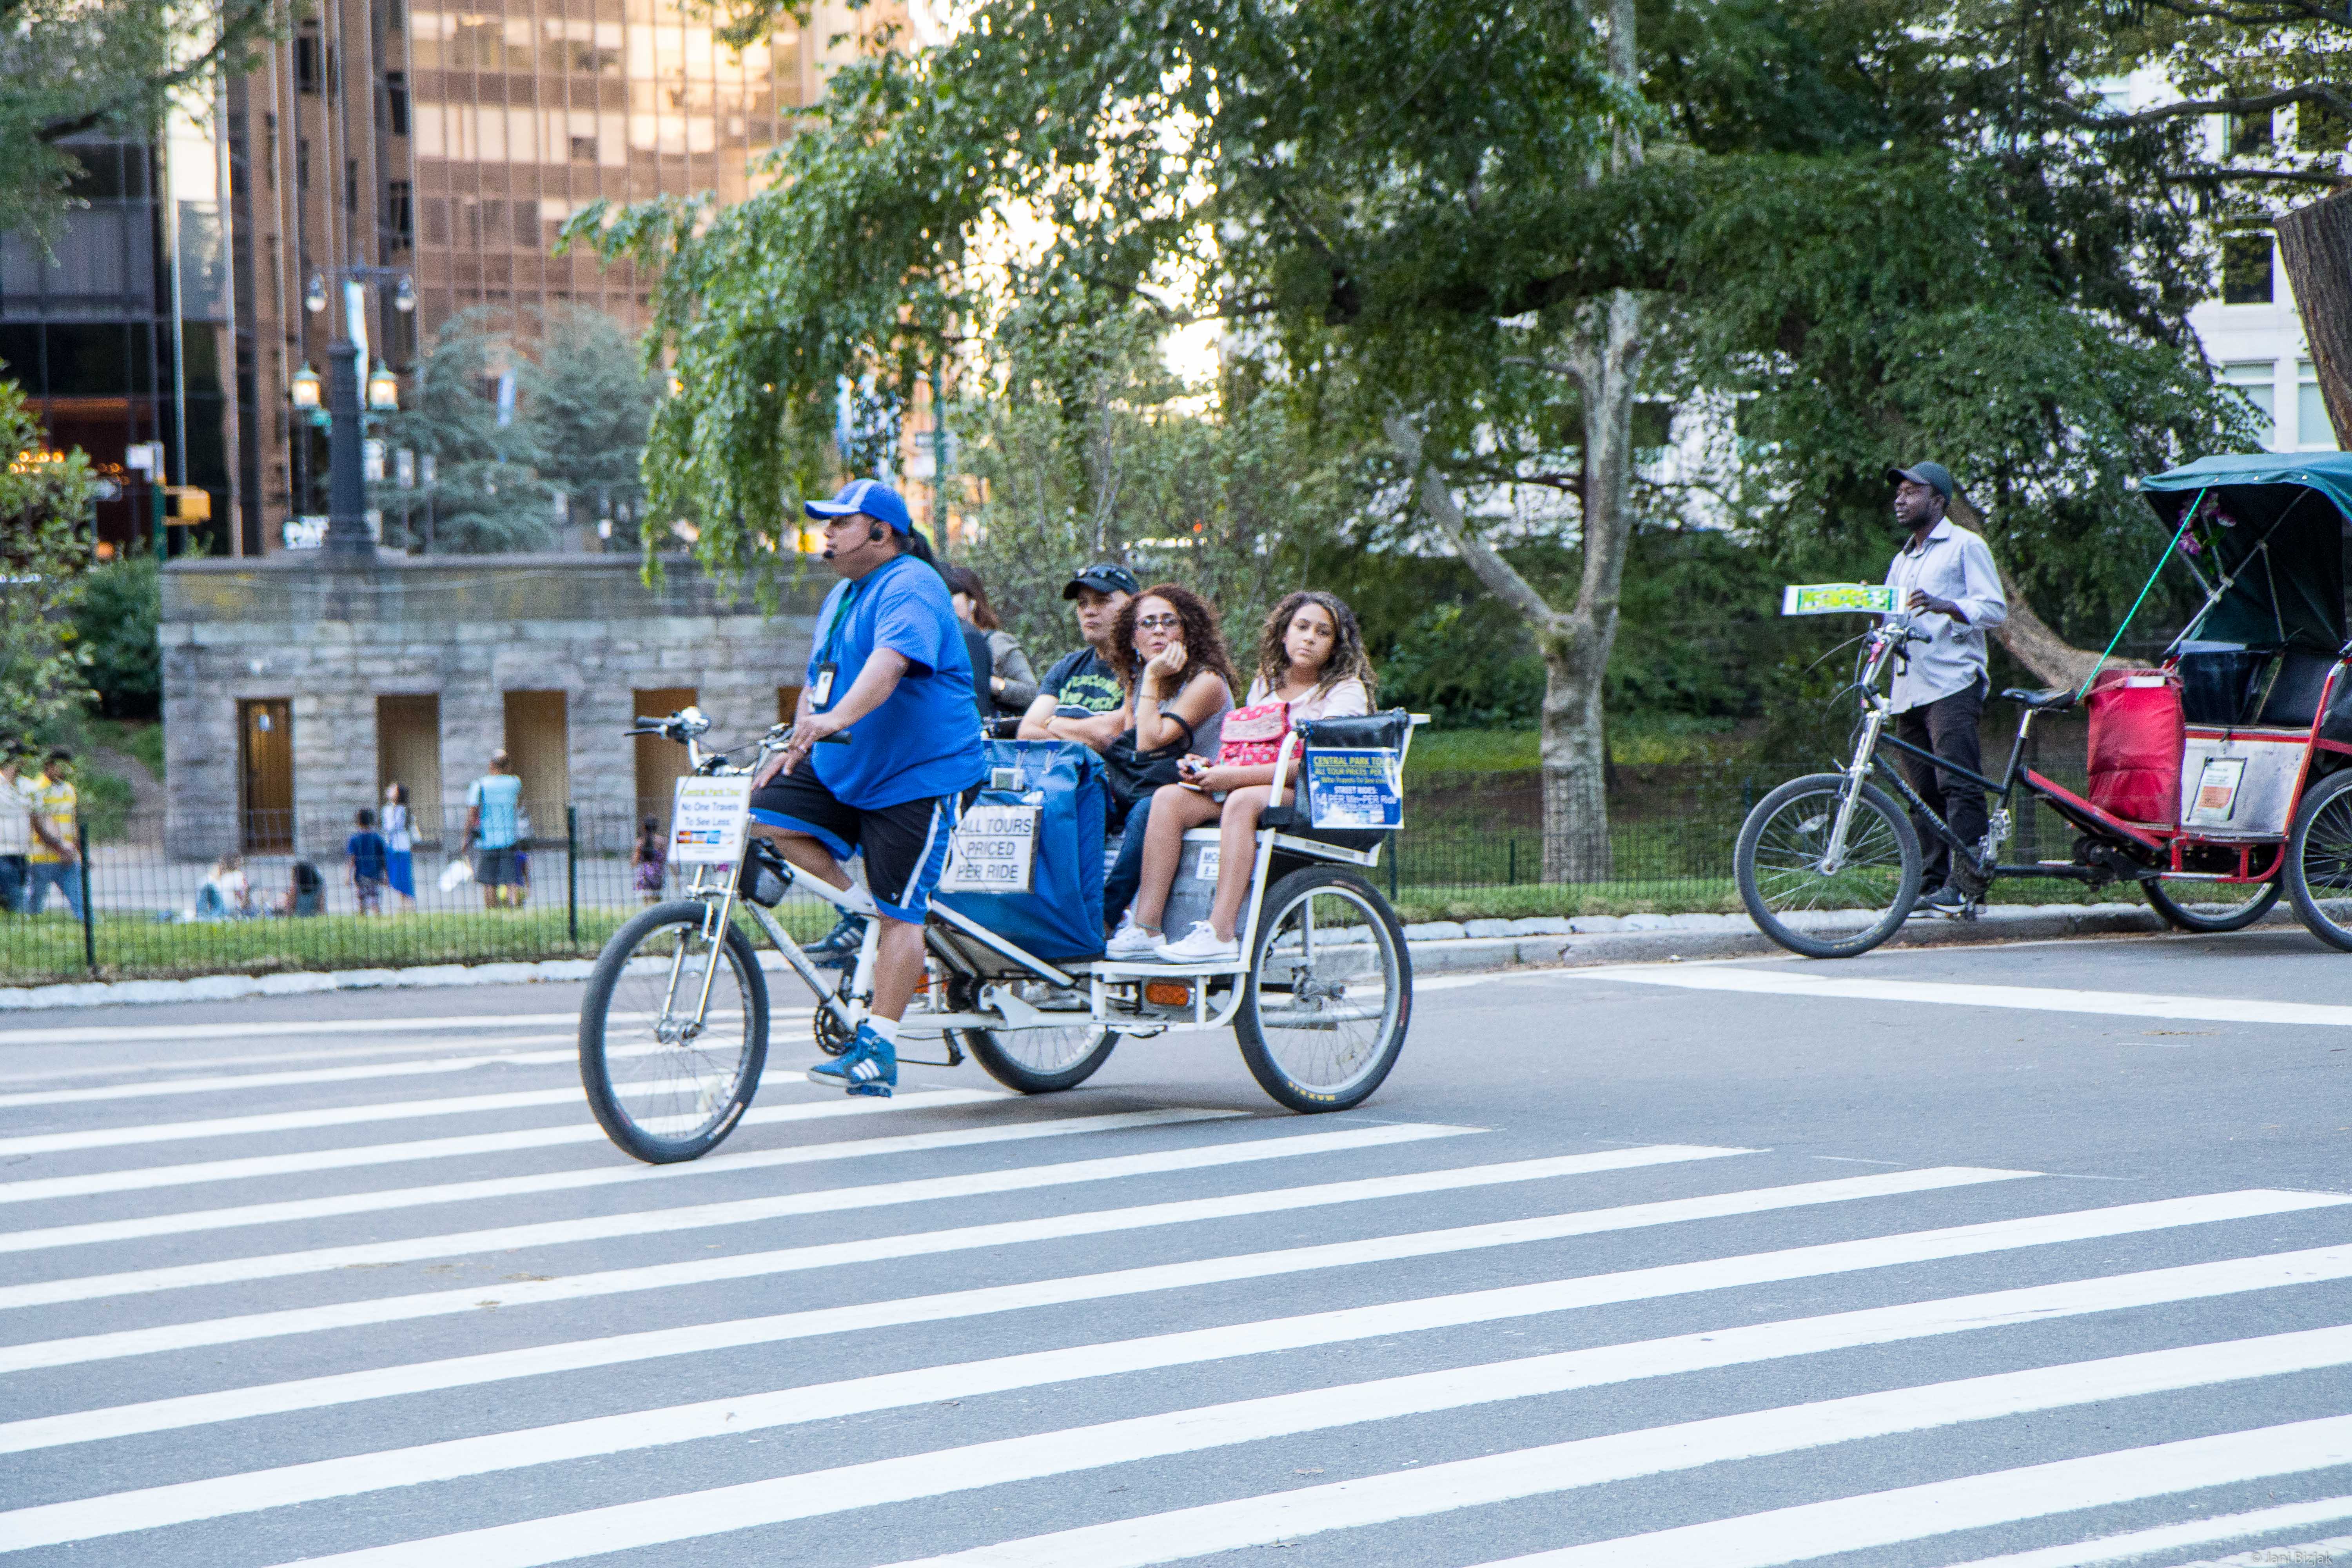 You can hire rickshaws to drive you around central park. It's quite expensive though, 15$ for 5 minutes. 